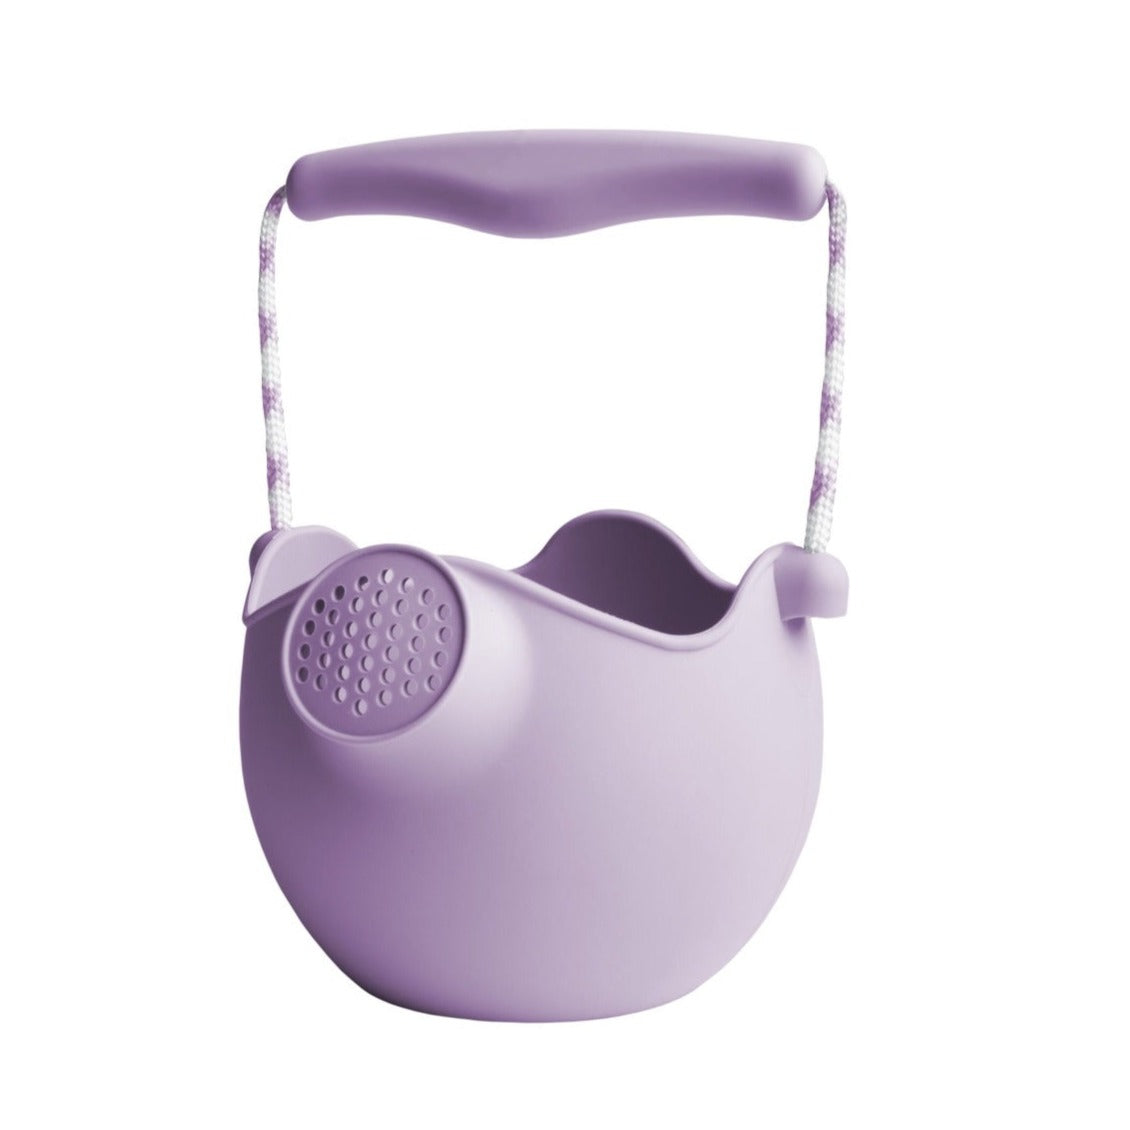 Scrunch Watering Can in Lavender | Scrunch Beach Toys available at Bear & Moo